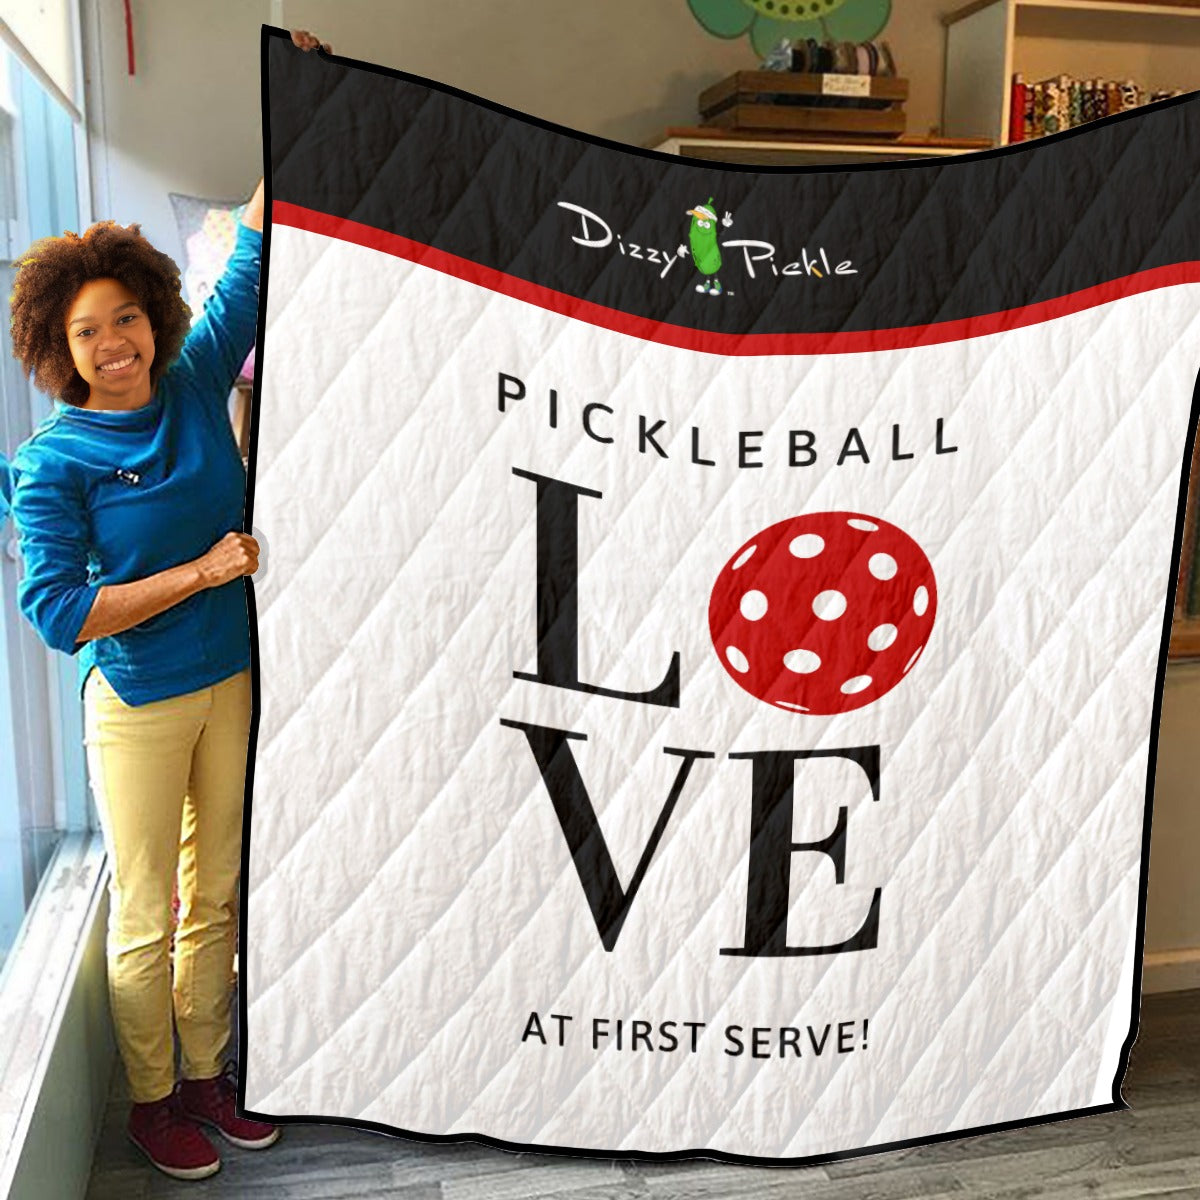 Pickleball Love at First Serve - White/Red - Lightweight Quilt by Dizzy Pickle